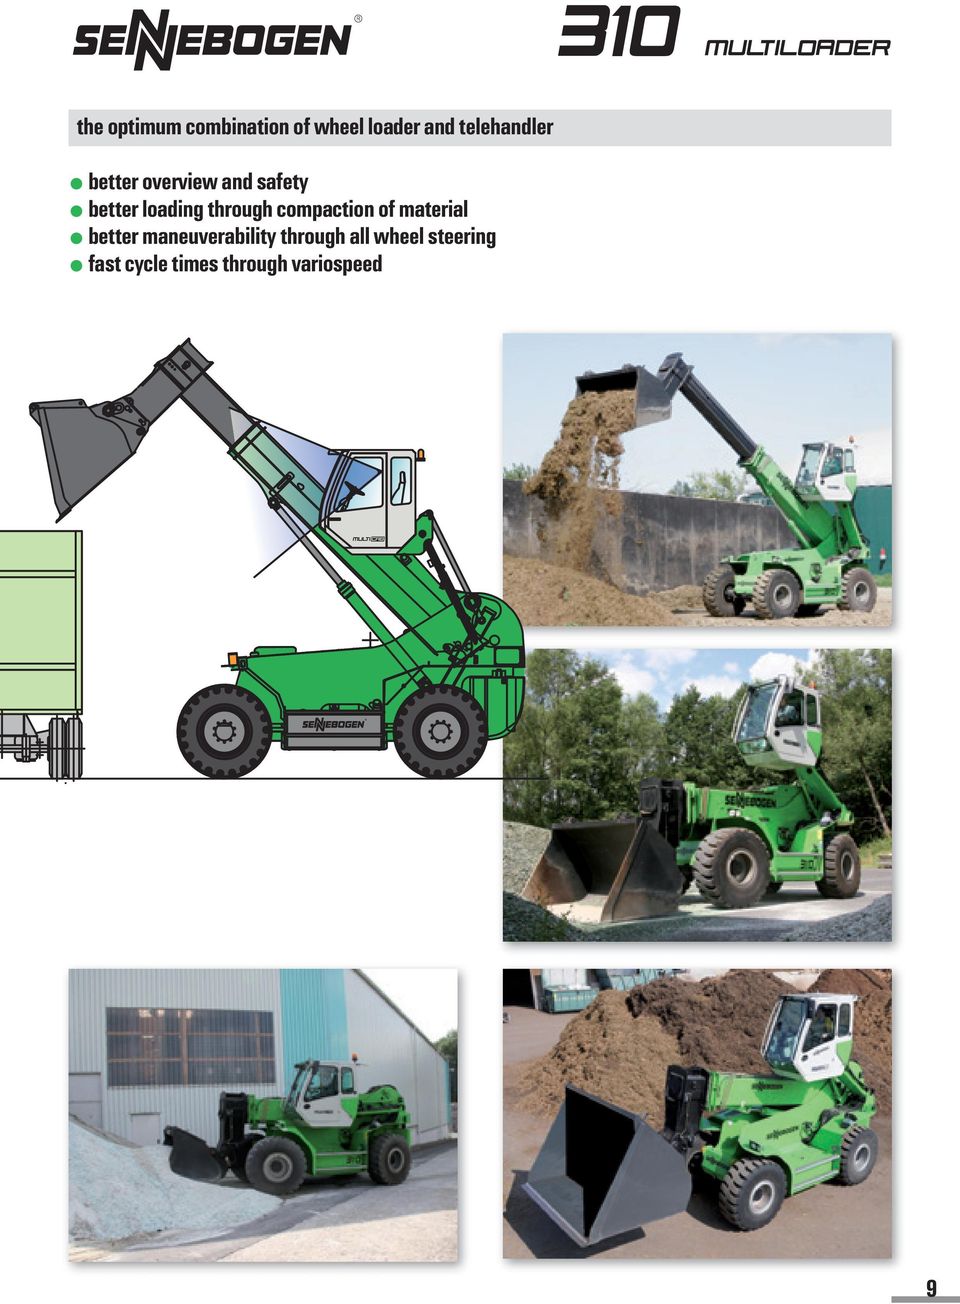 through compaction of material better maneuverability